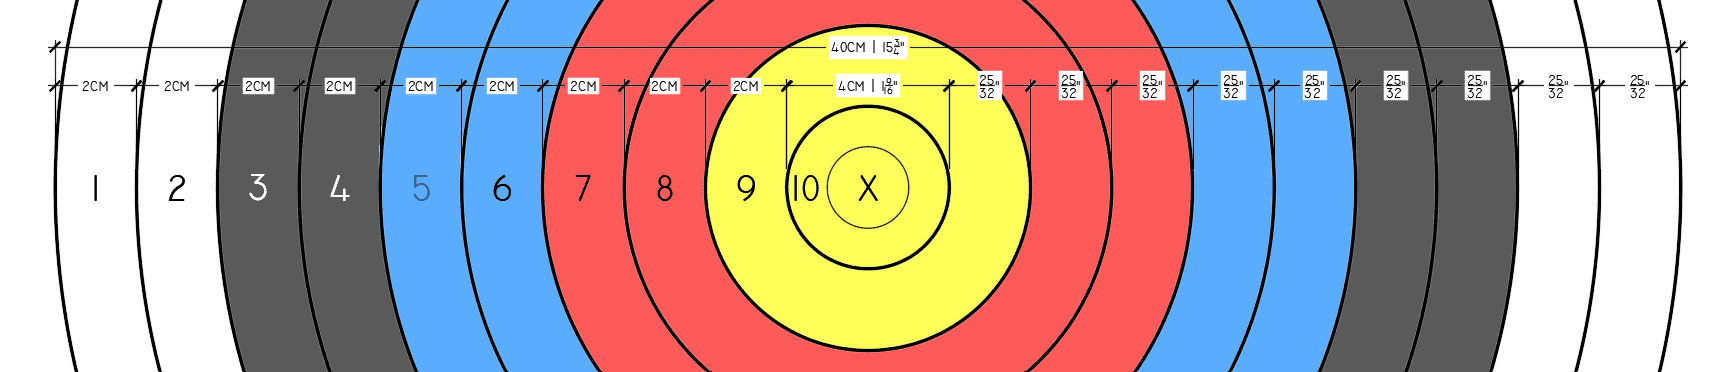 40cm Target Guide - Dimensions and Scoring